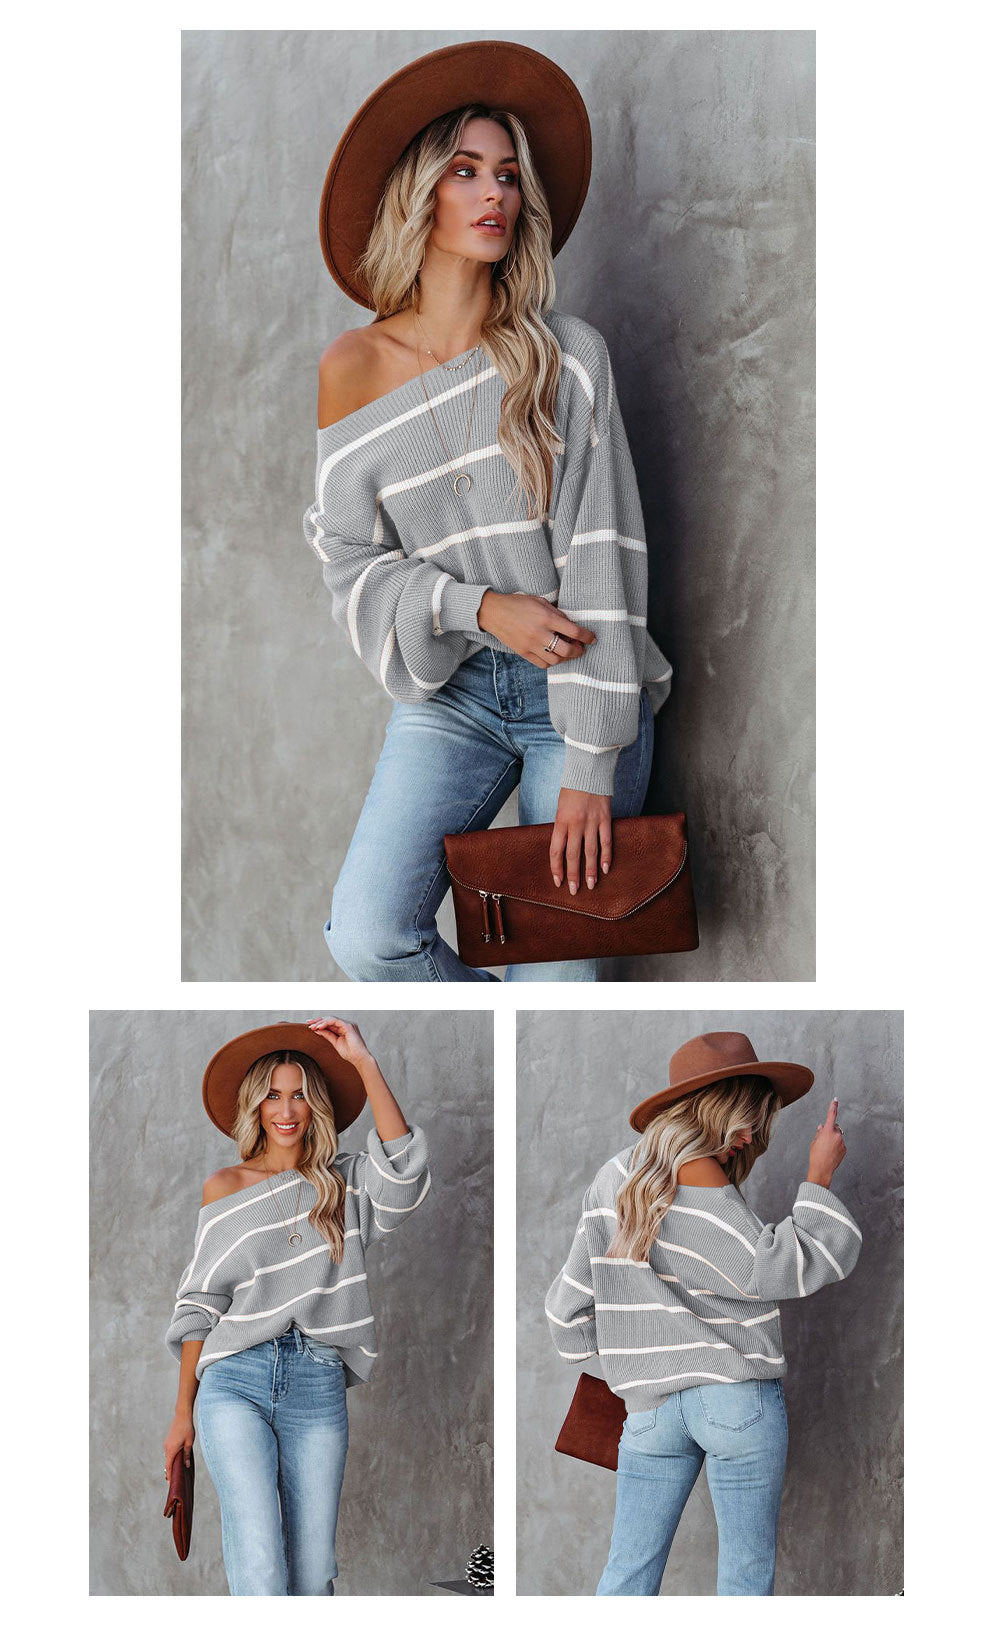 Women Off The Shoulder Striped Knitted Pullover Sweaters-Shirts & Tops-Black-S-Free Shipping Leatheretro